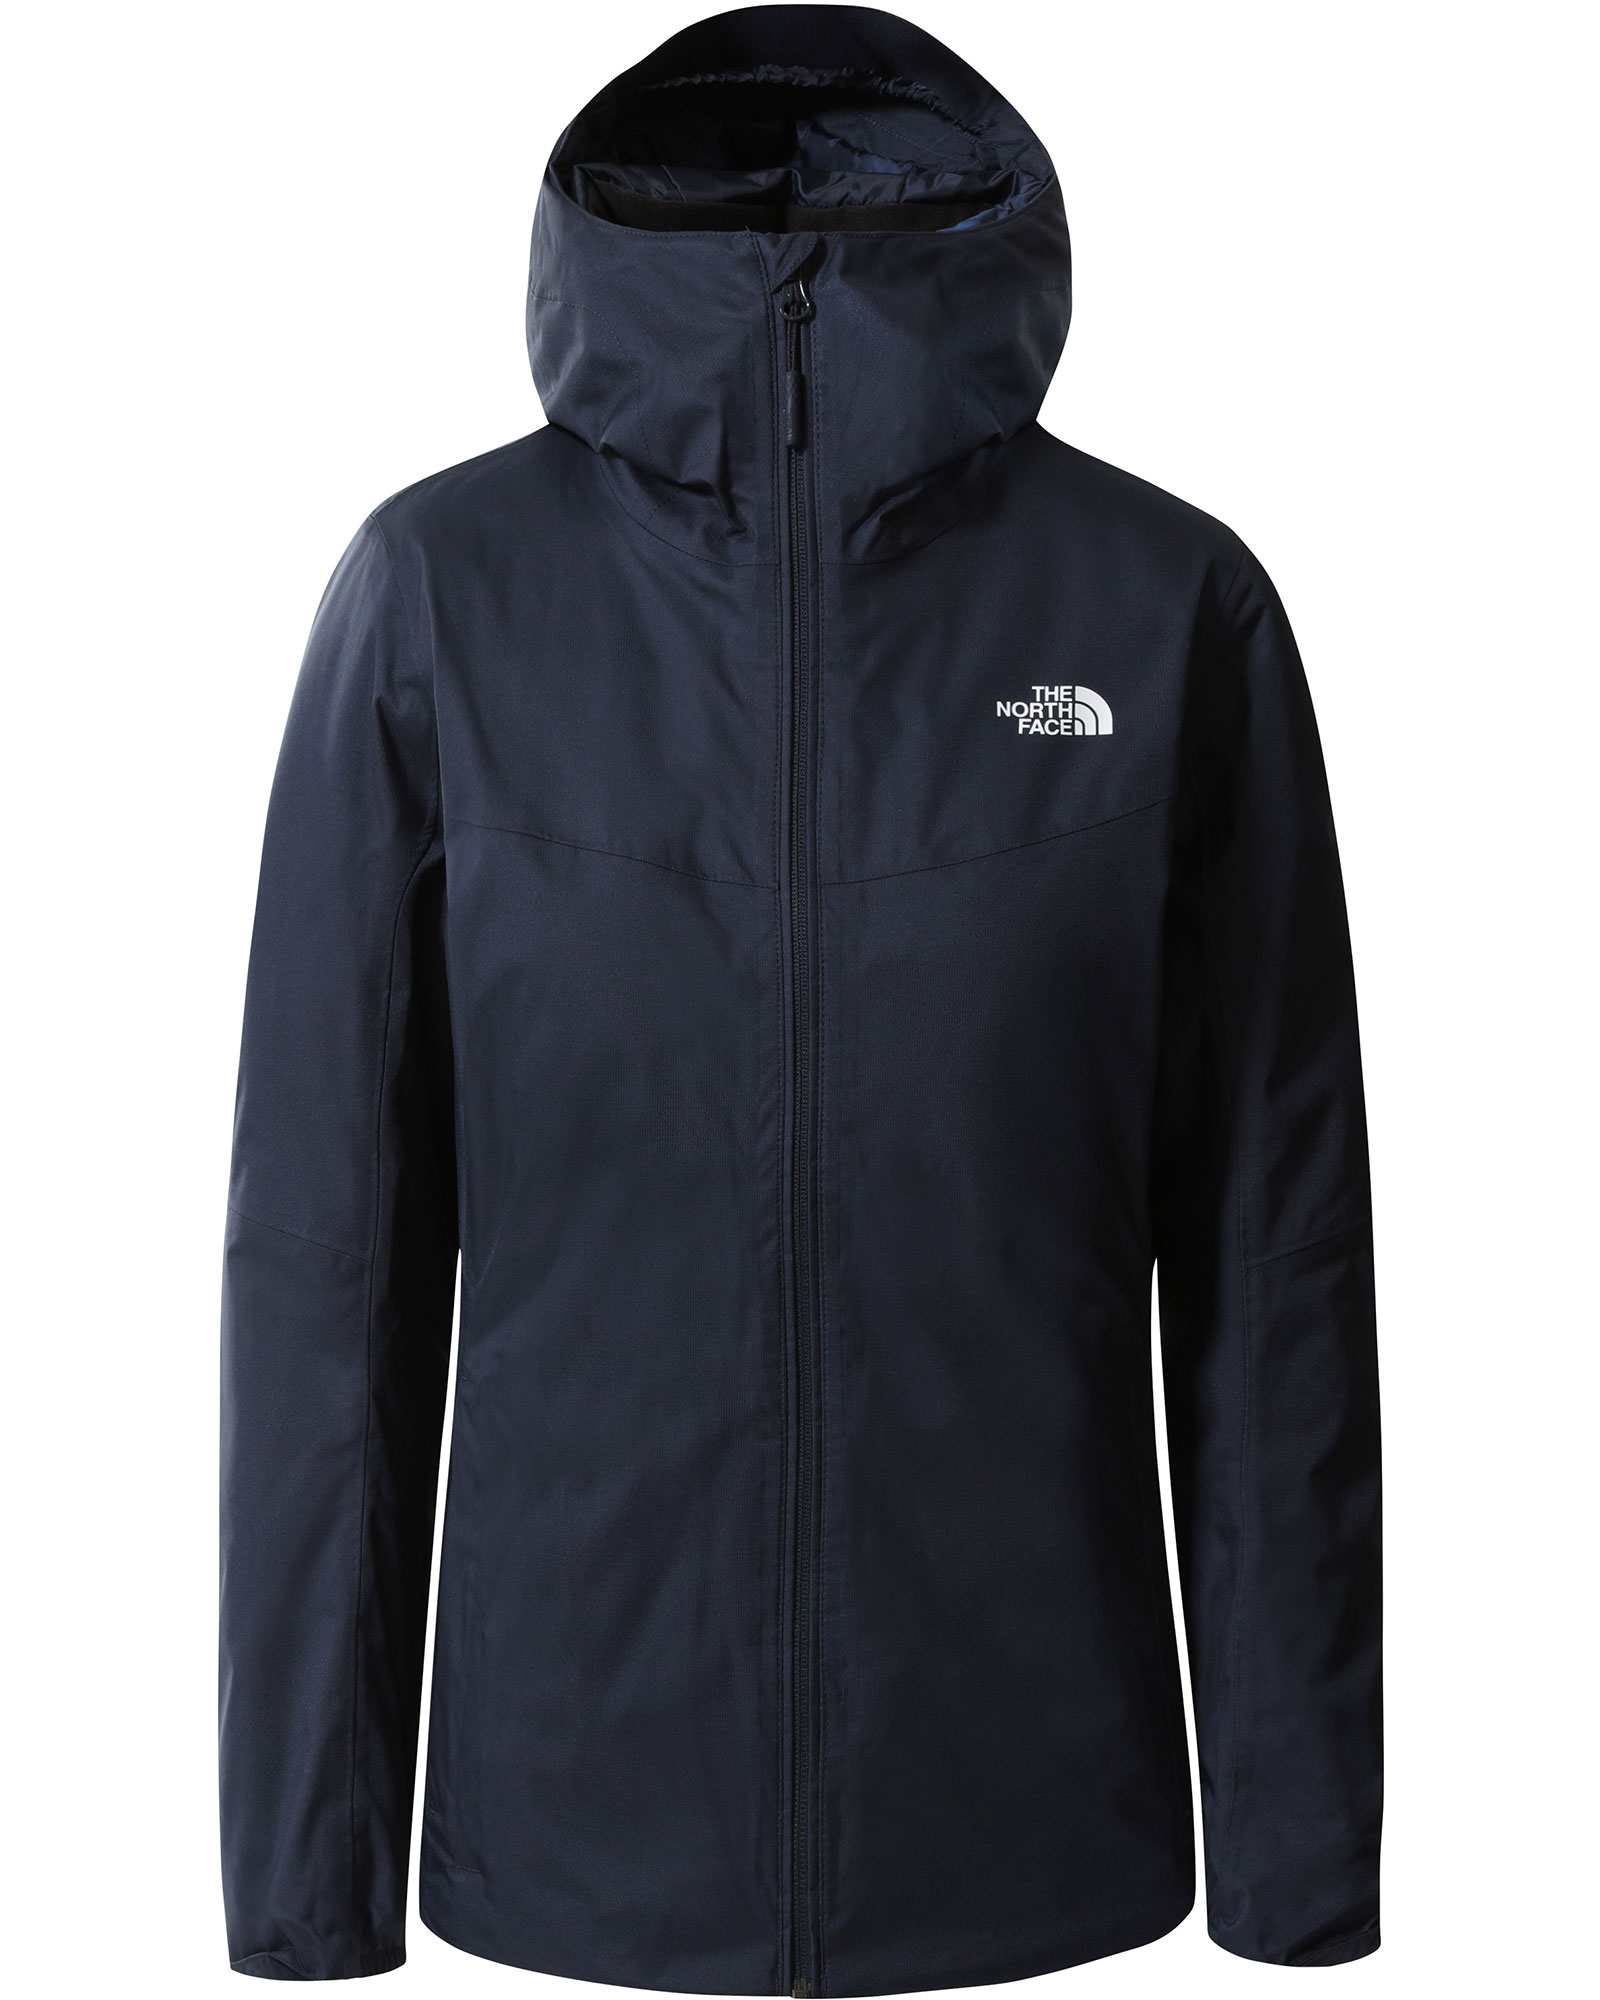 The North Face Quest DryVent Women’s Insulated Jacket - Urban Navy XL